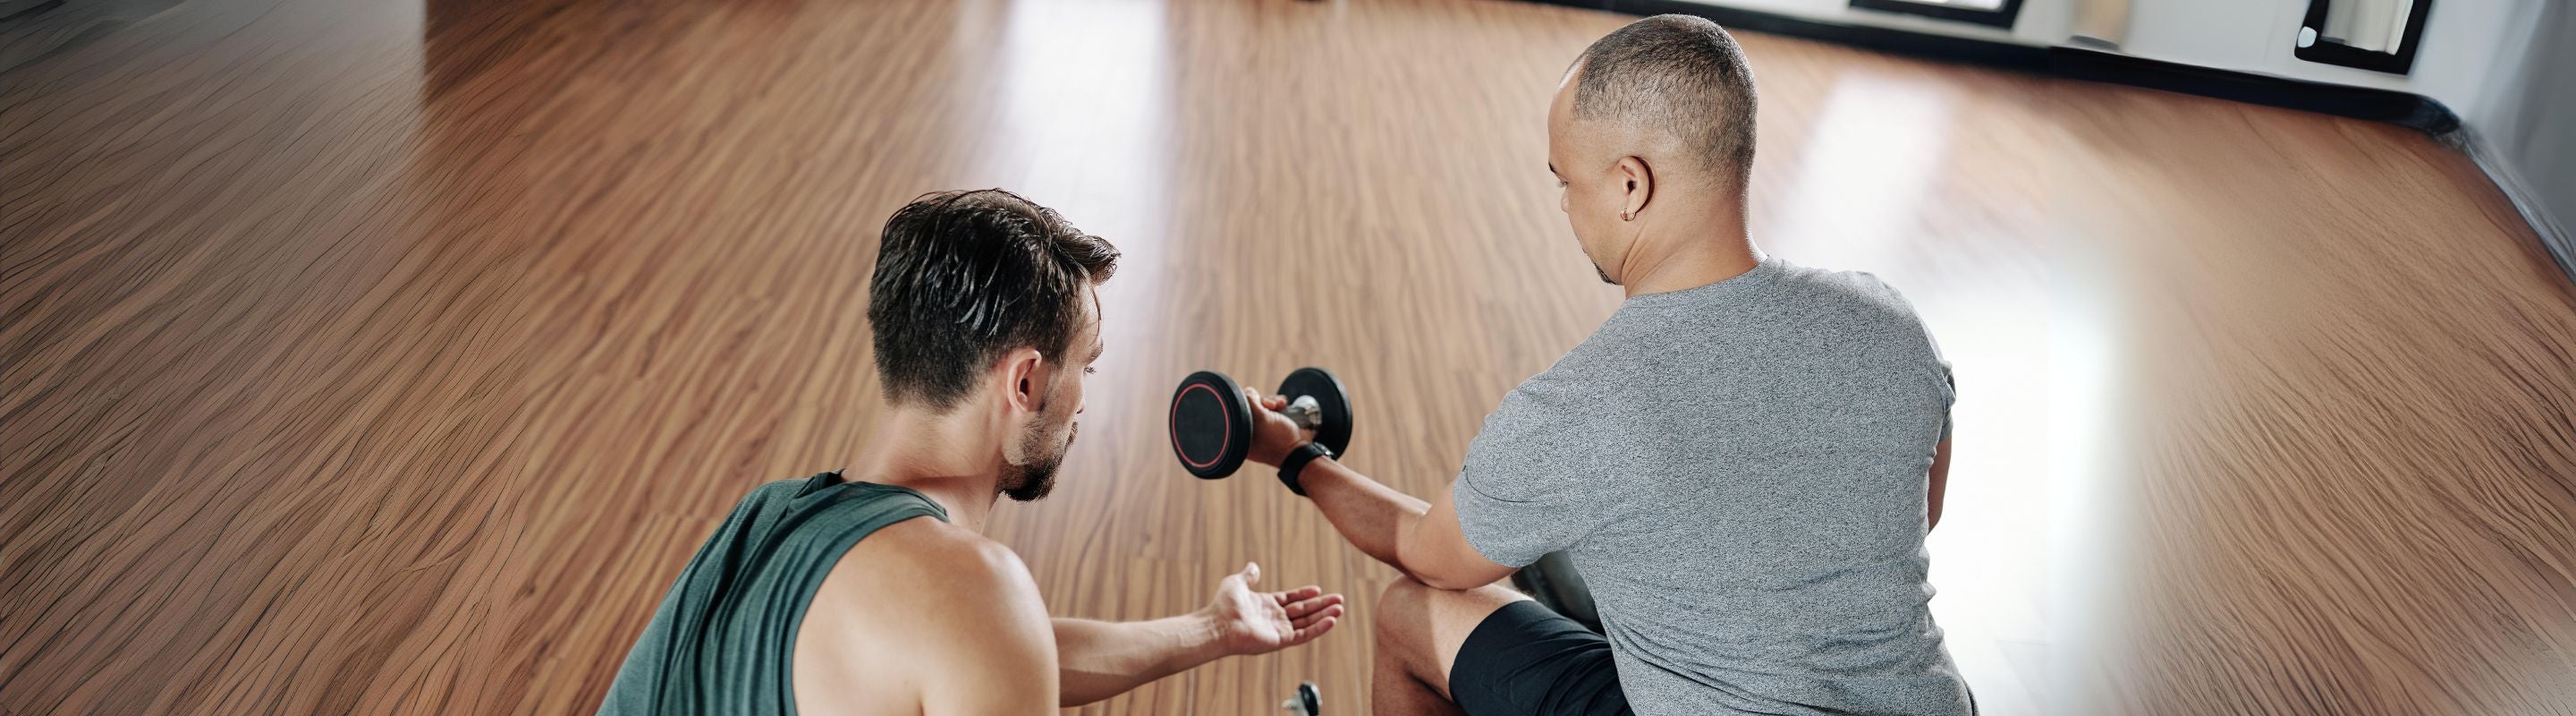 men at the gym. one is showing the other how to do resisted wrist flexion exercises with a dumbell